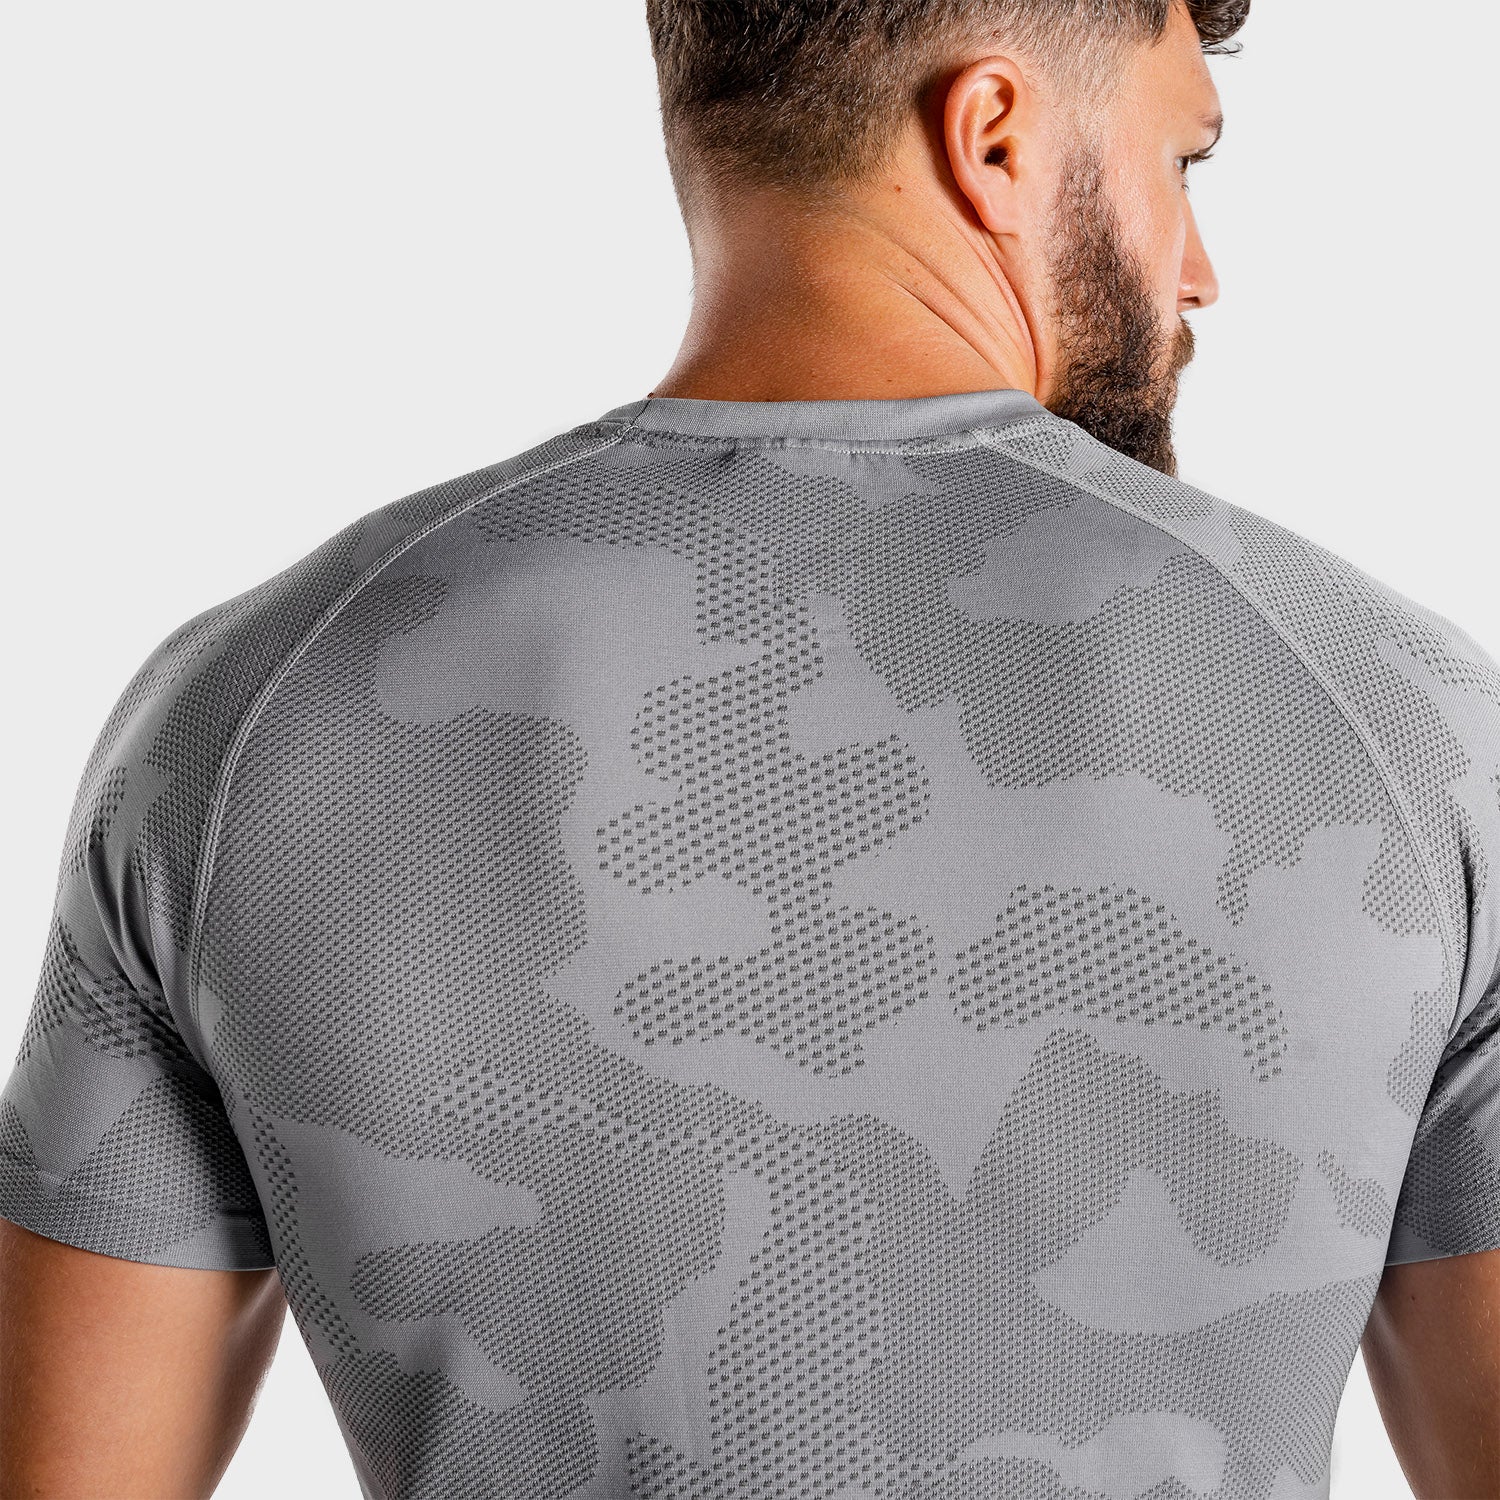 squatwolf-workout-shirts-for-men-wolf-seamless-workout-tee-grey-gym-wear